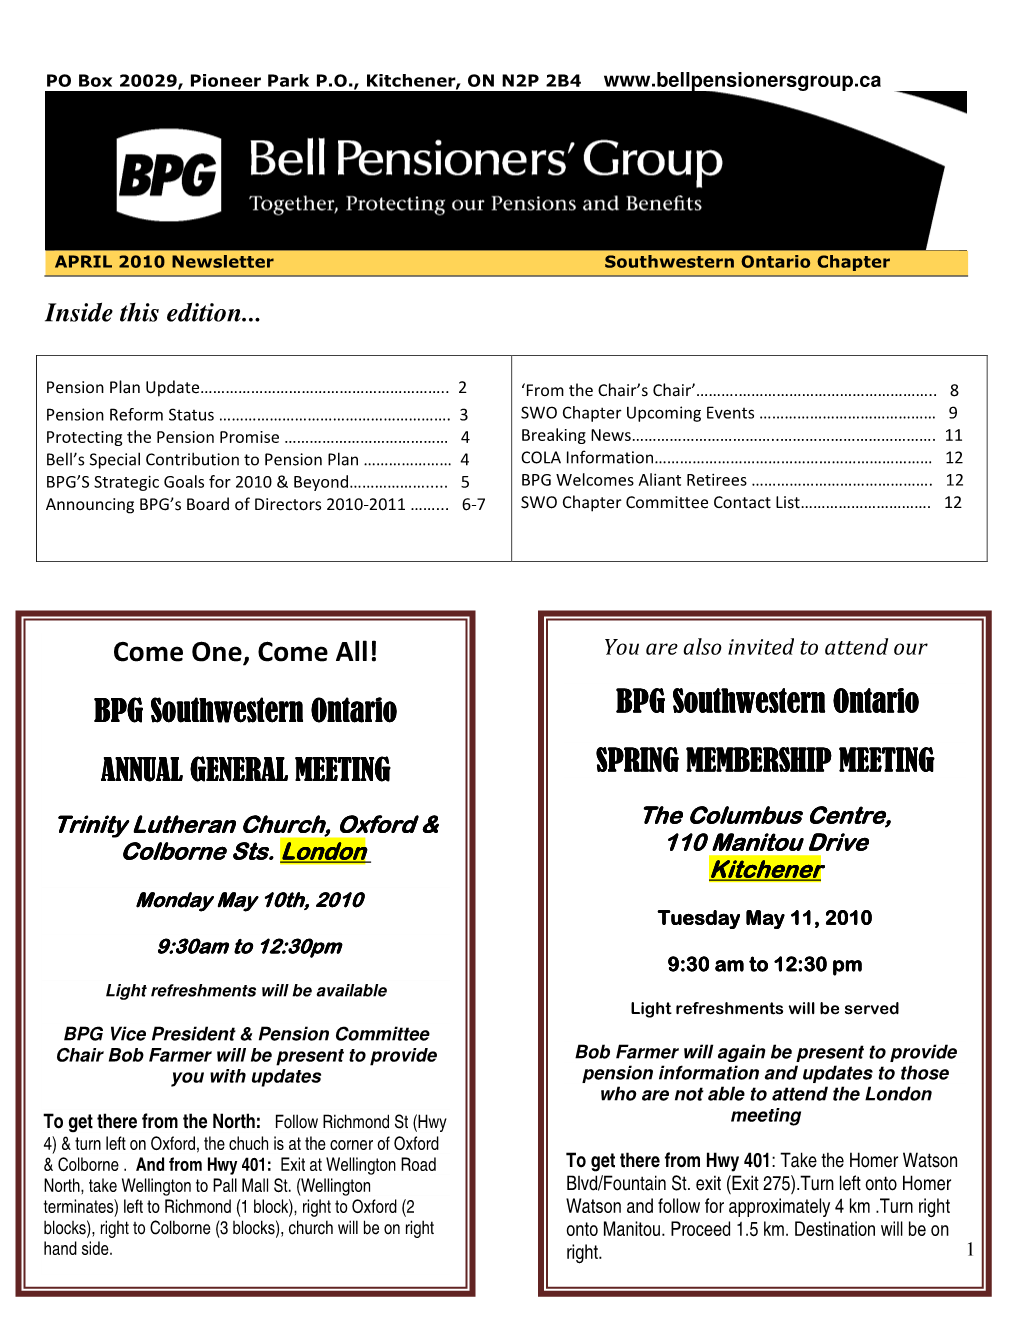 Come One, Come All! You Are Also Invited to Attend Our BPG Southwestern Ontario BPG Southwestern Ontario